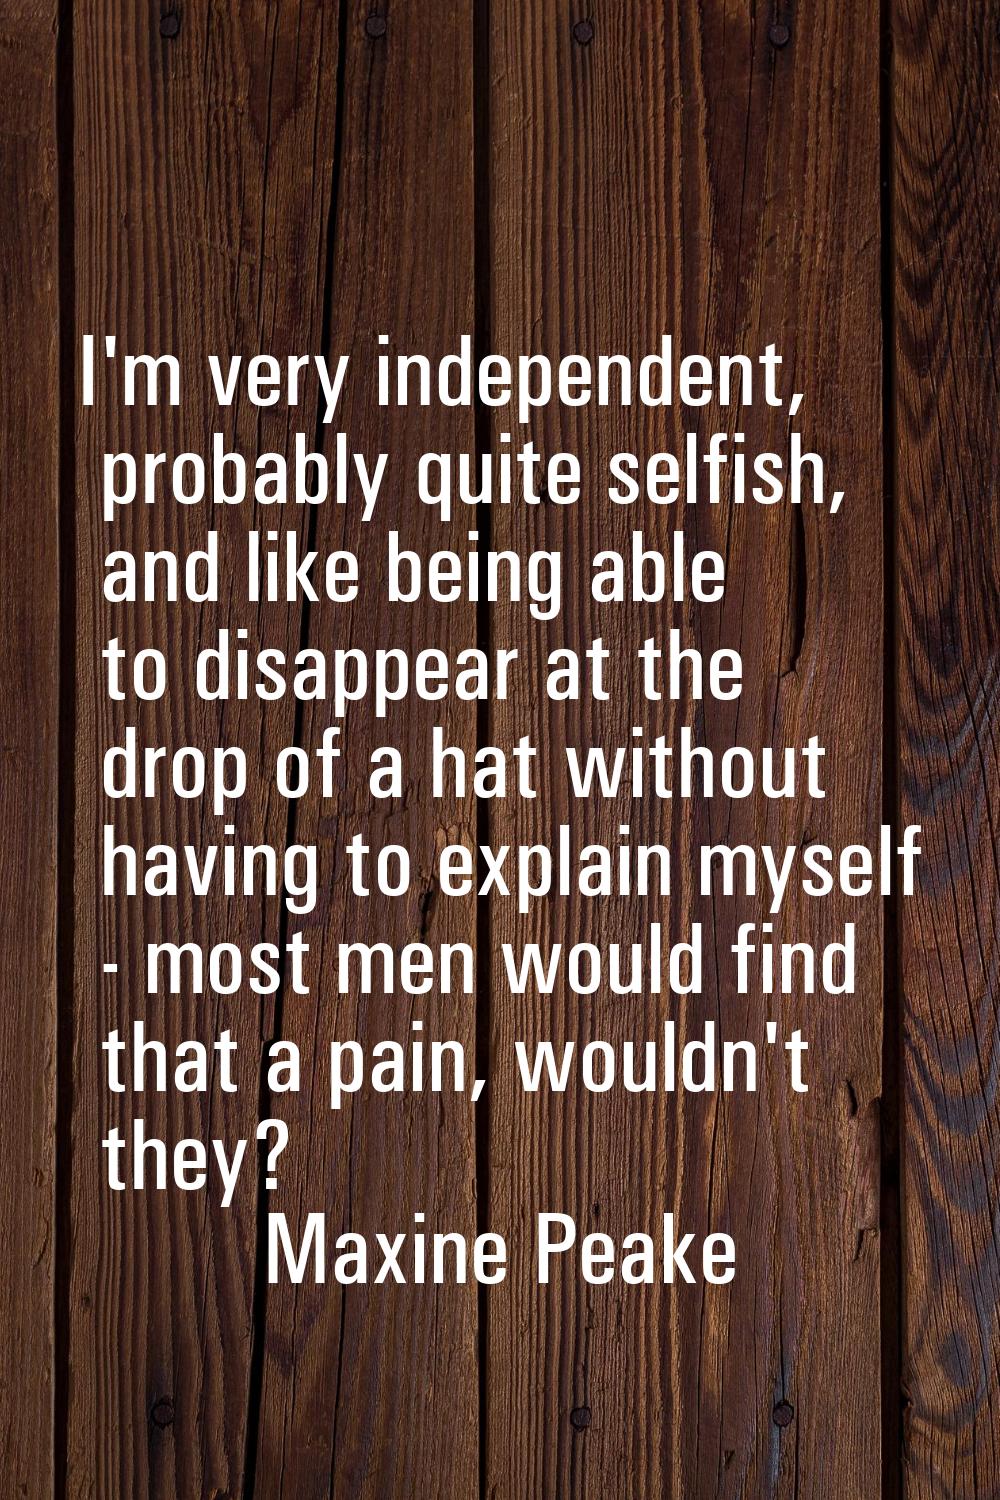 I'm very independent, probably quite selfish, and like being able to disappear at the drop of a hat